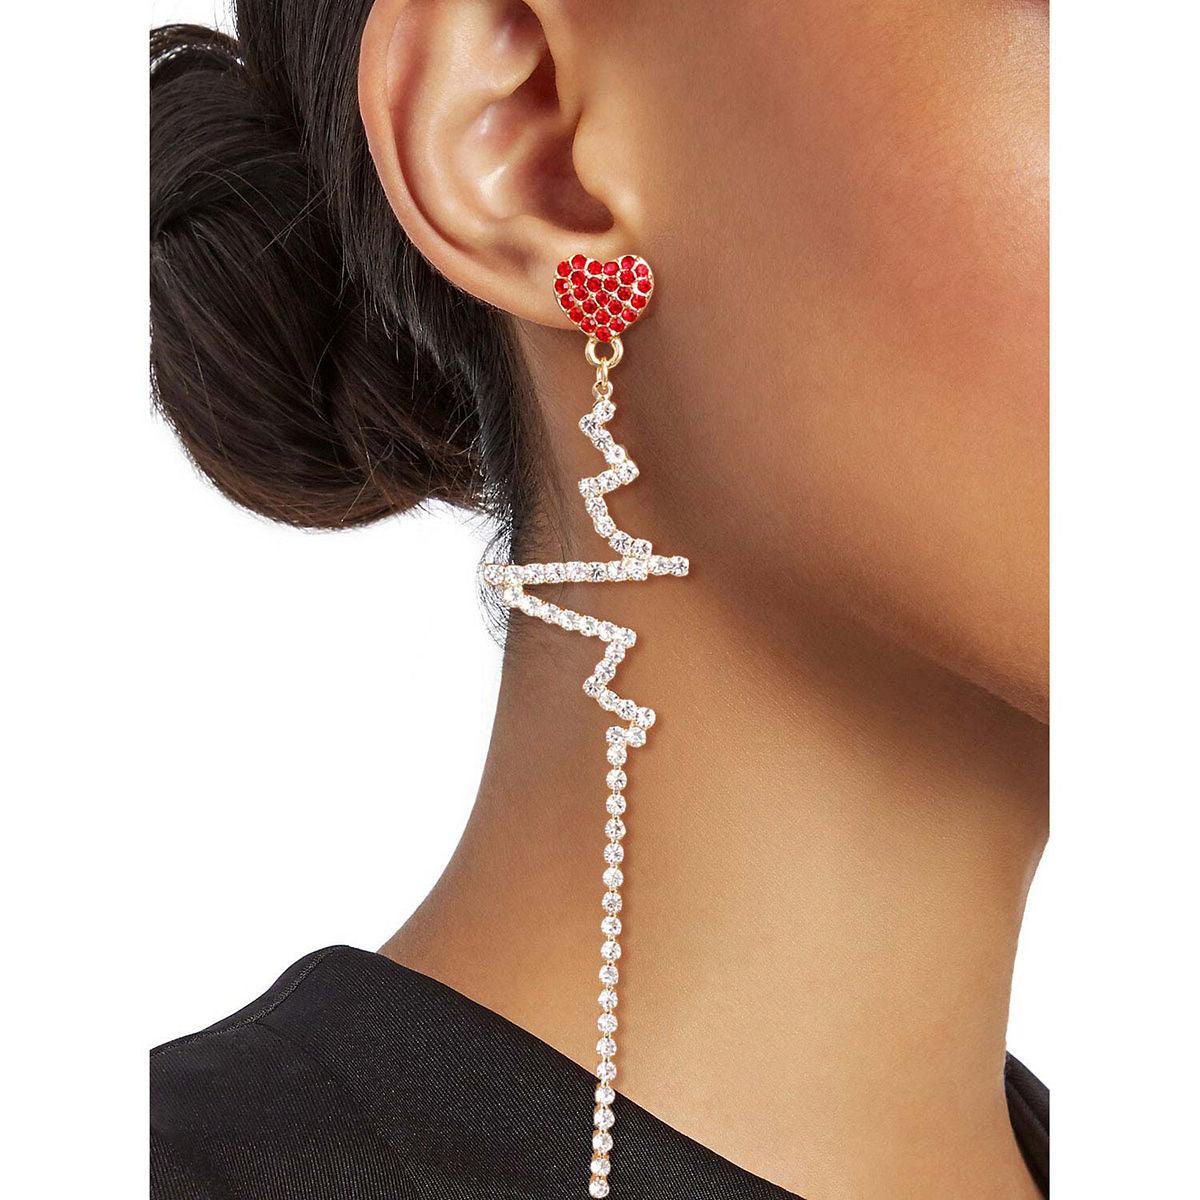 Heartbeat Earrings: Where Gold Meets Red in Stunning Fashion Jewelry